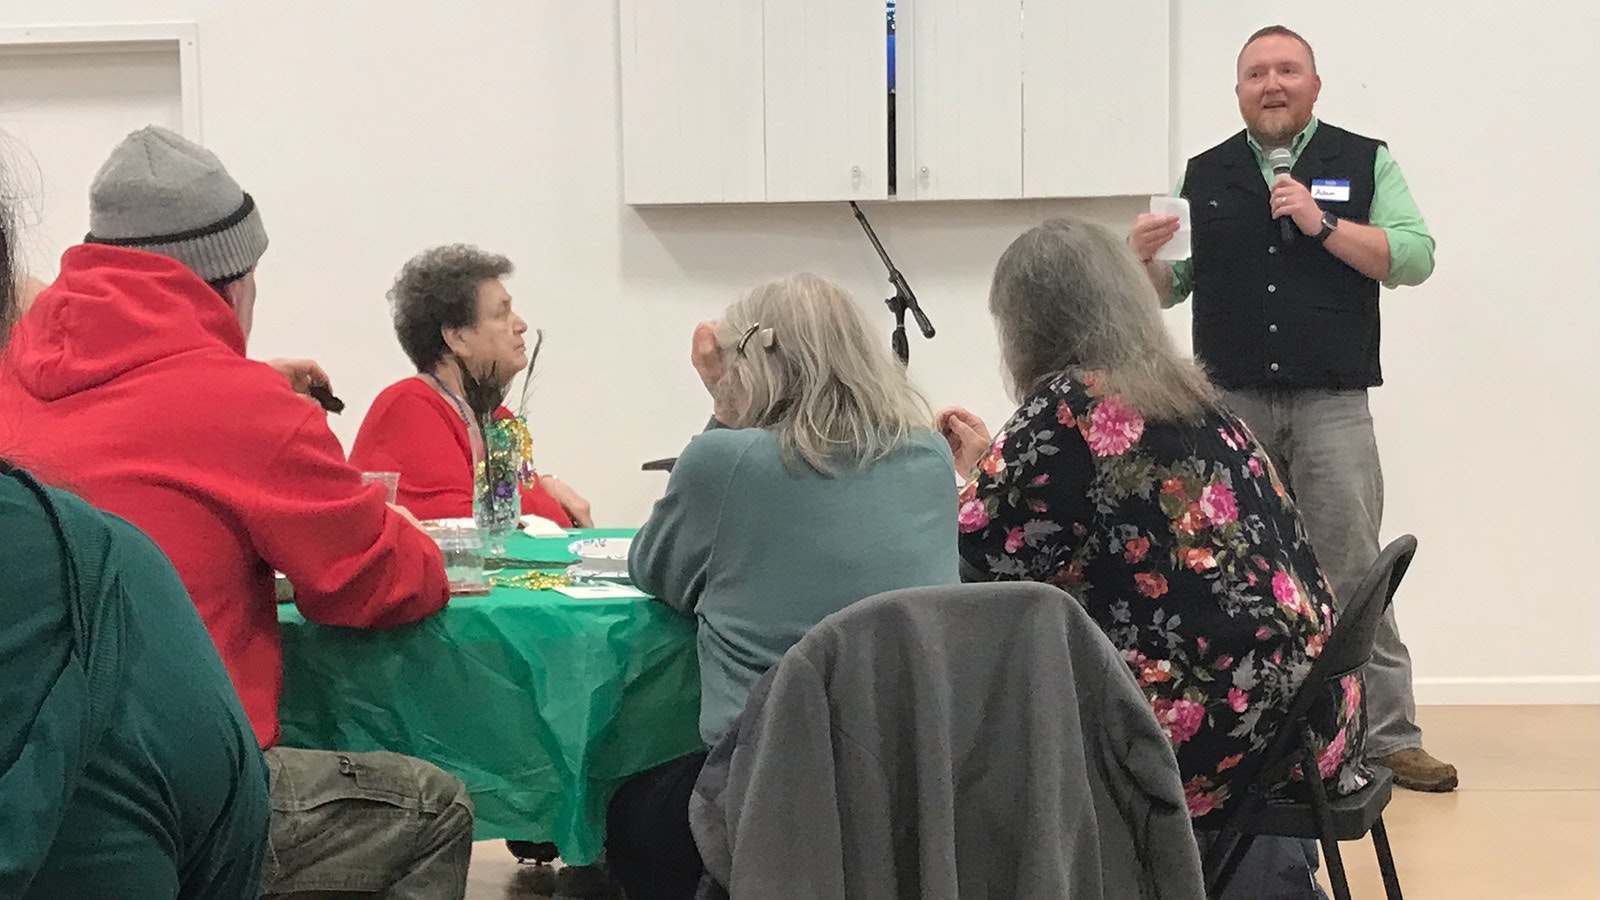 Thermopolis Mayor Adam Estenson speaks during a Mardi Gras get-together hosted by the Hot Springs County Democratic Party and also attended by local Republicans.